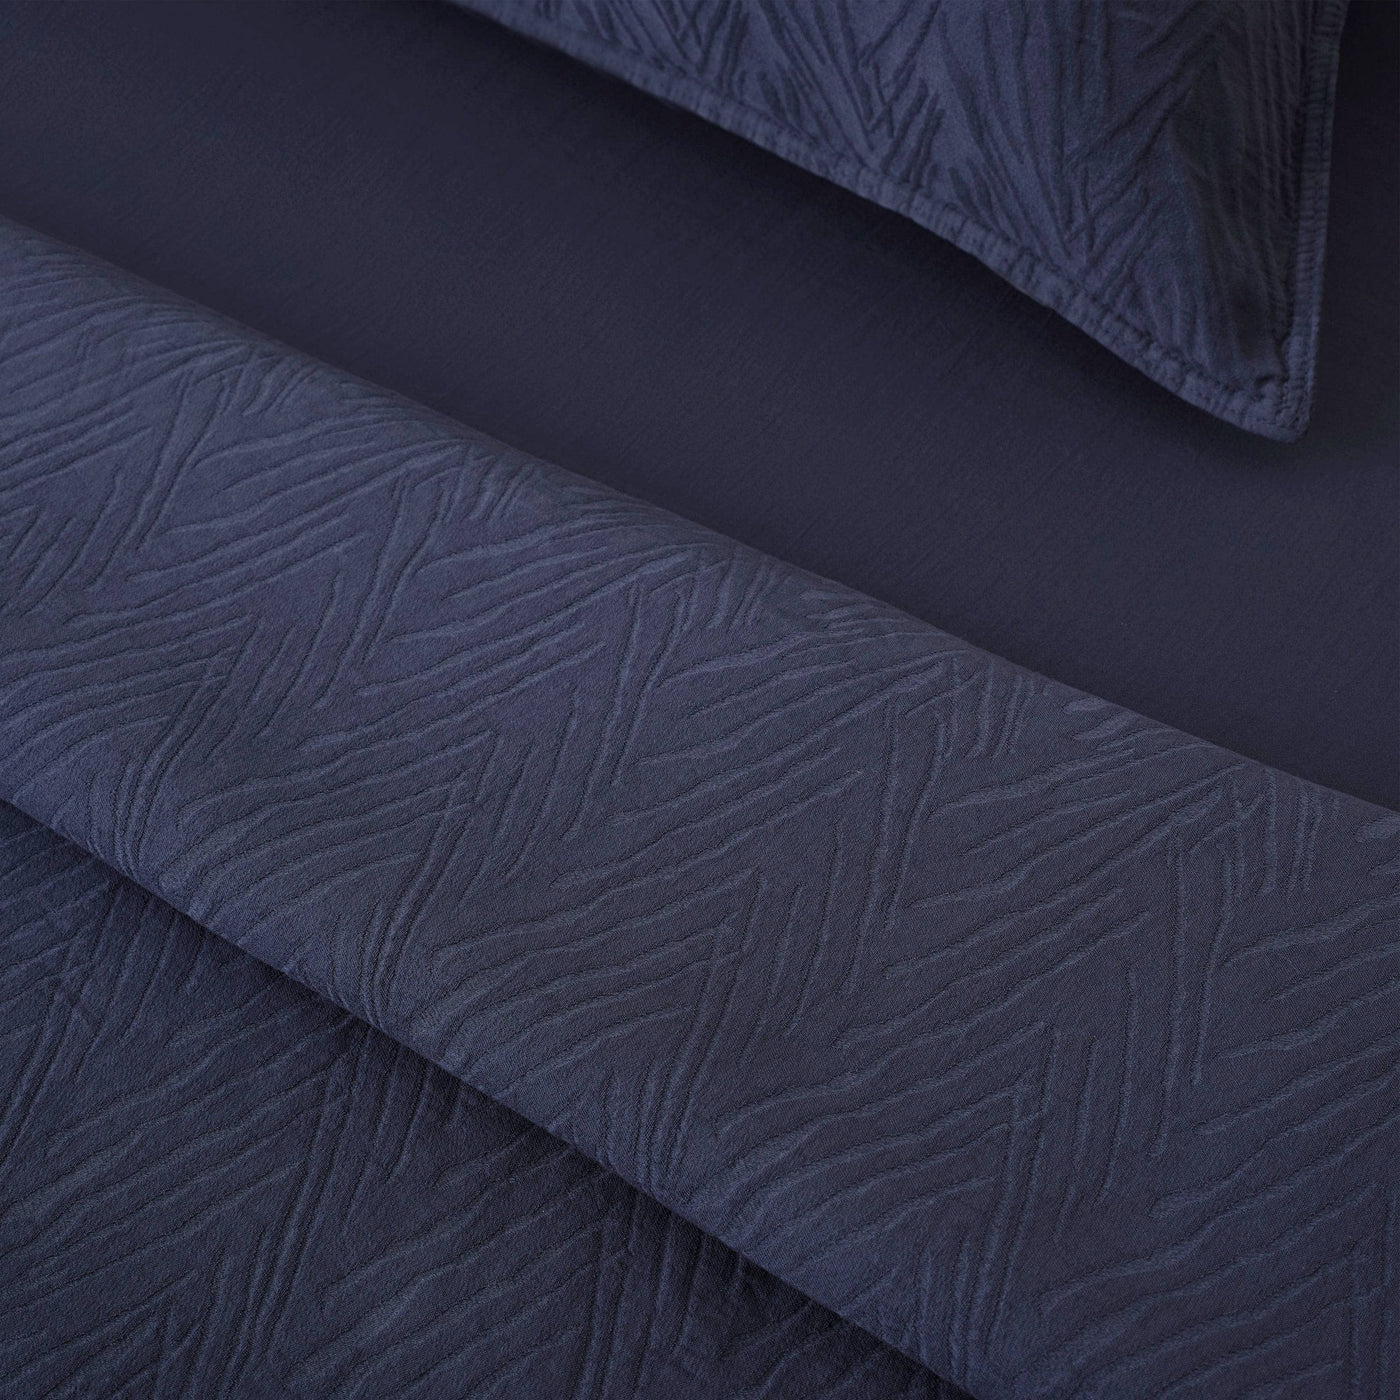 Freddie 100% Turkish Cotton 300 TC Fitted Sheet, Navy, Double Size Bed Sheets sazy.com